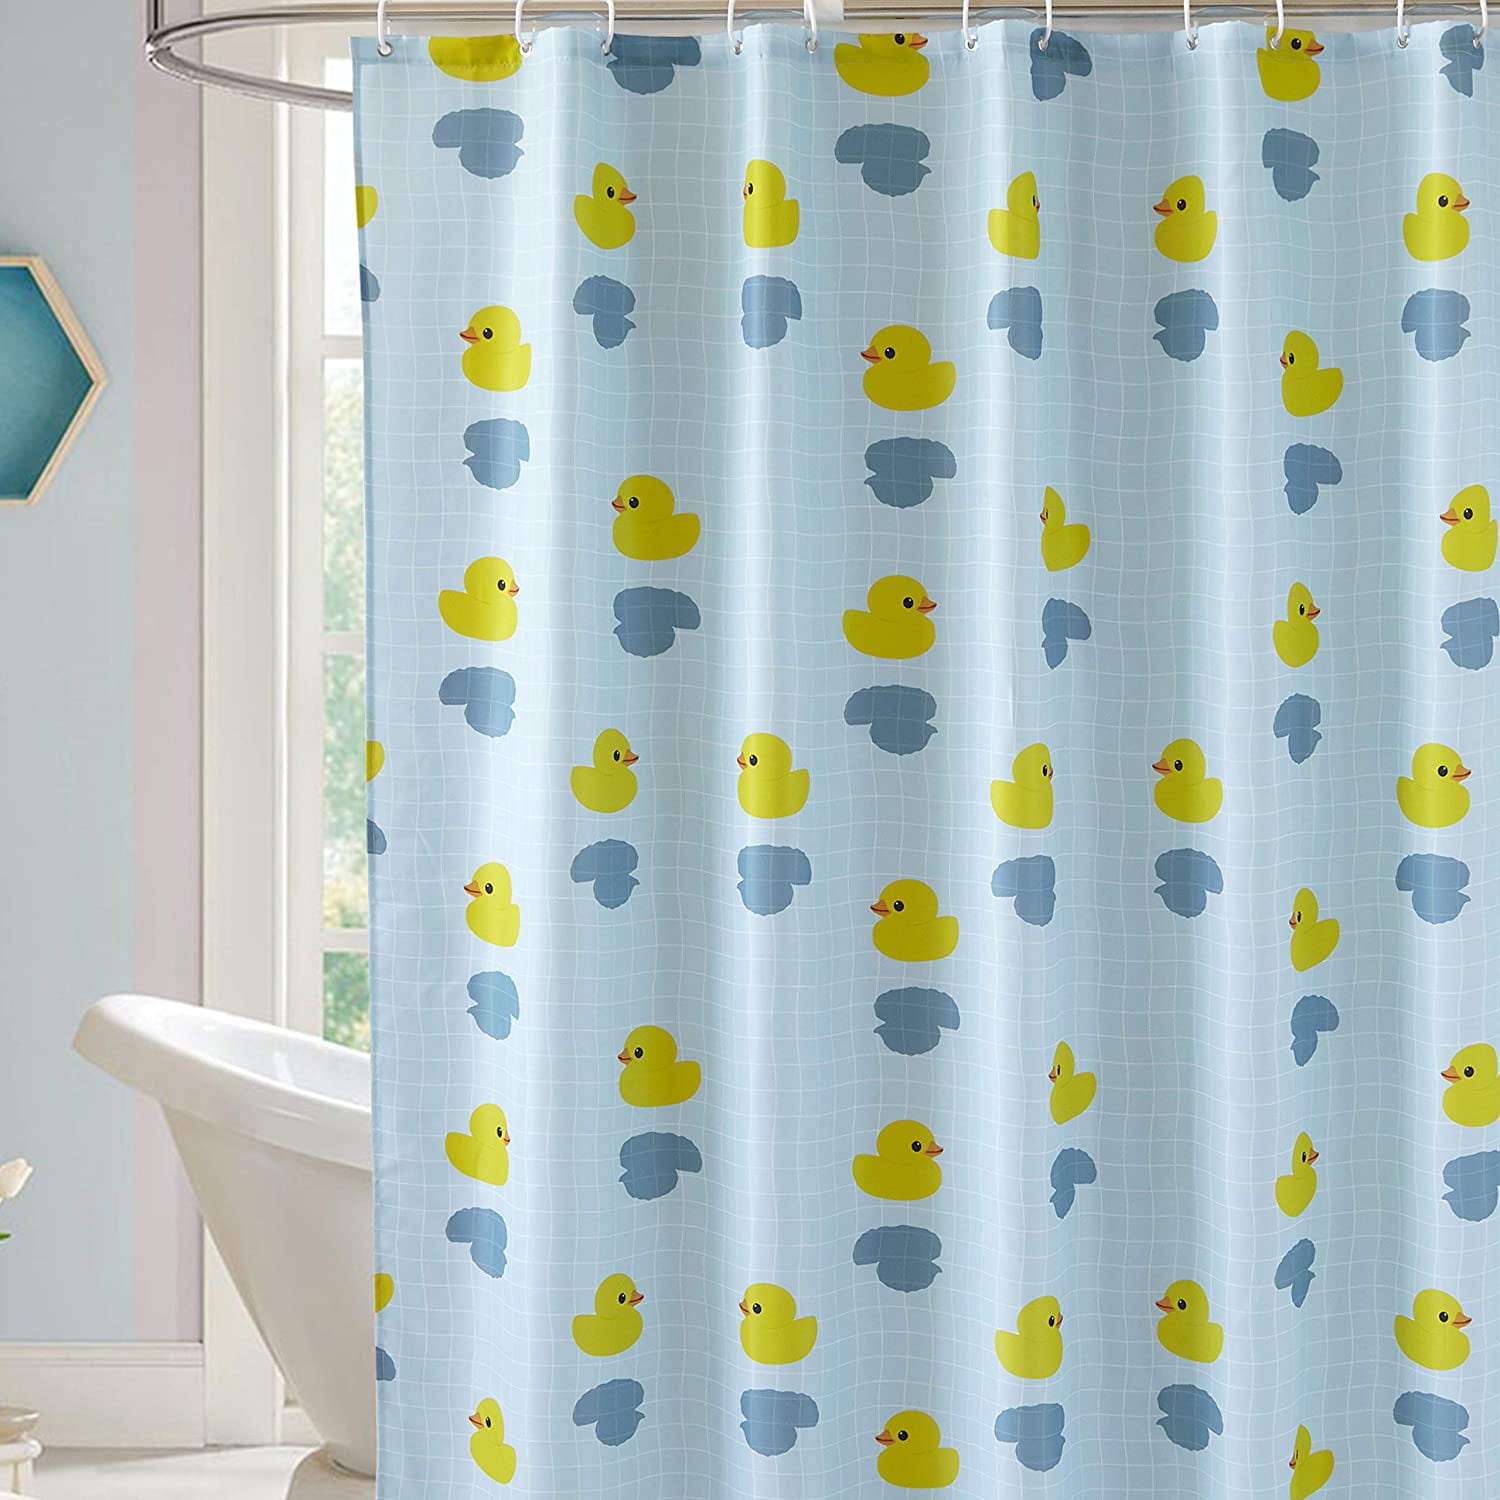 Shower Curtain Mould Proof Fabric, What Are Most Shower Curtains Made Of